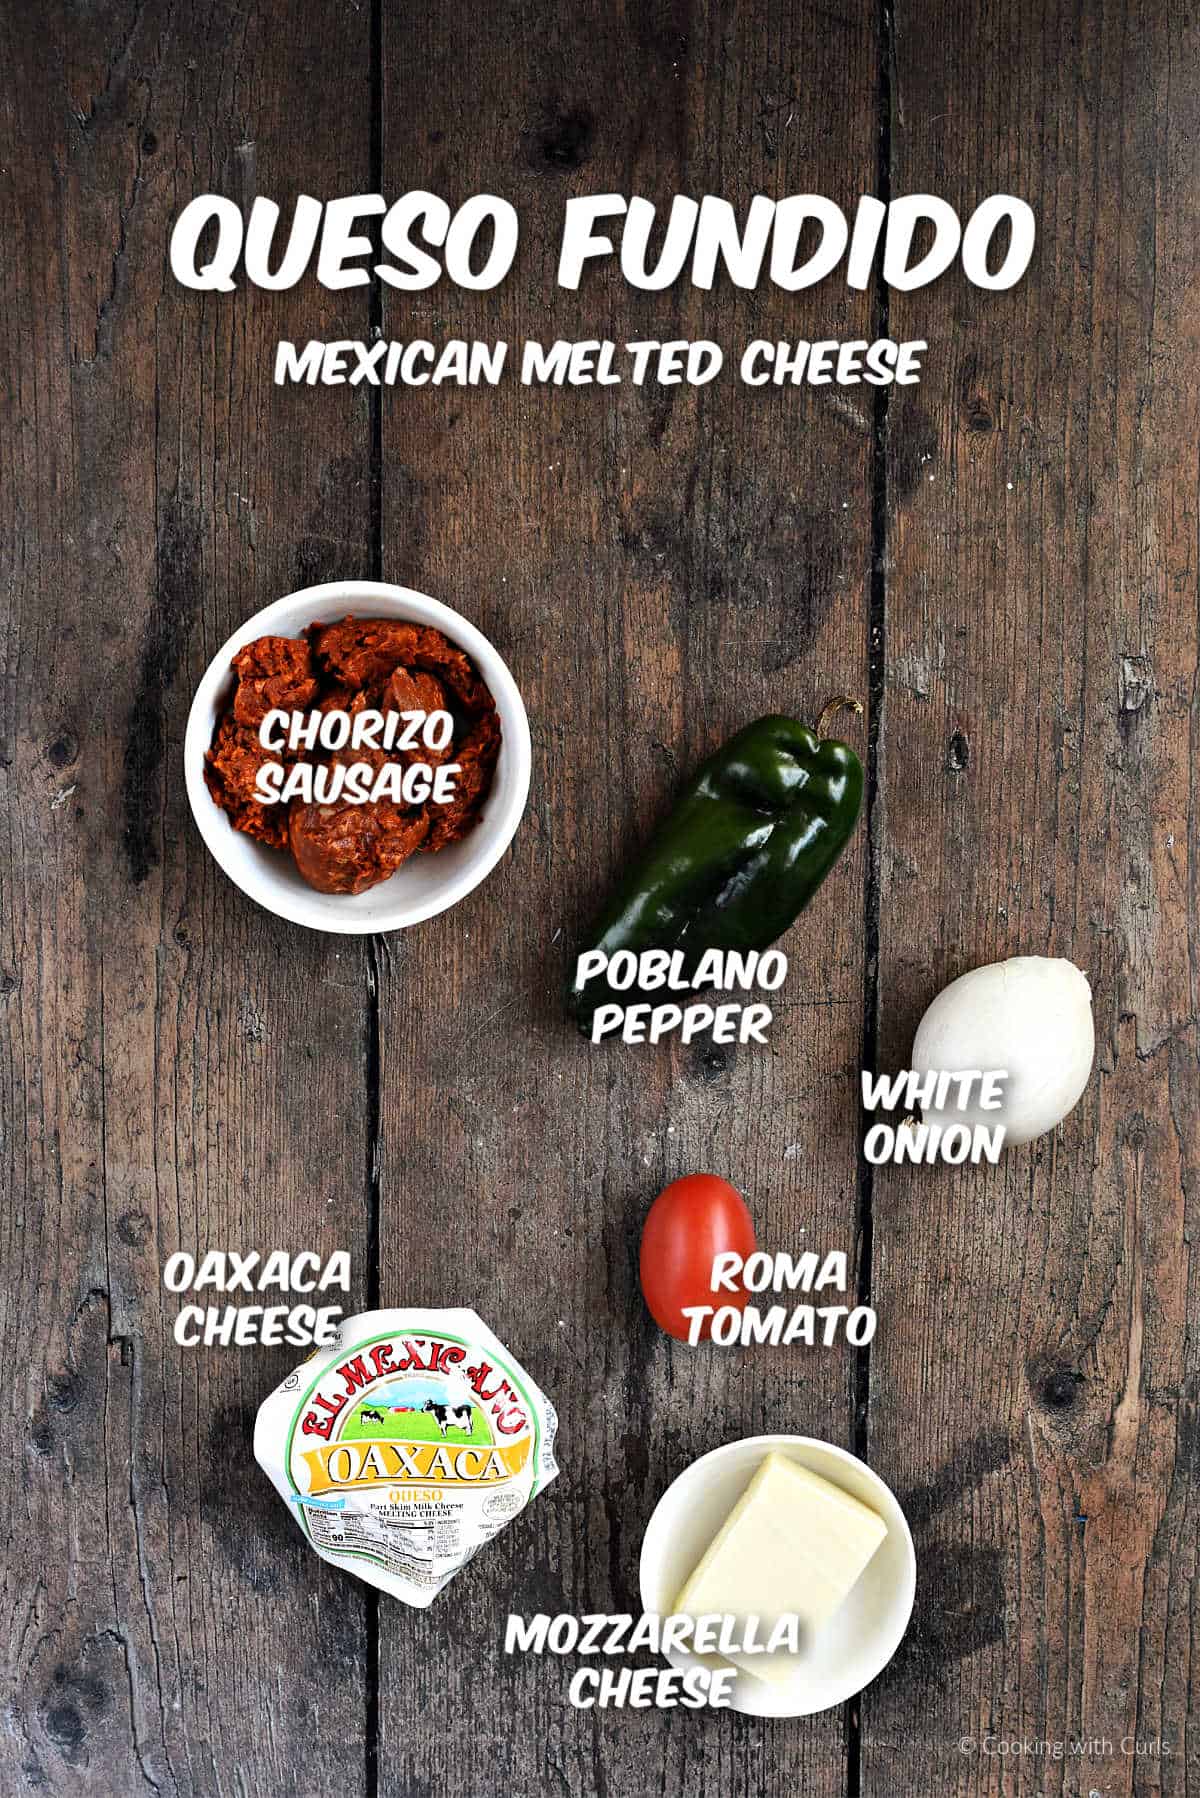 Queso Fundido ingredients image.